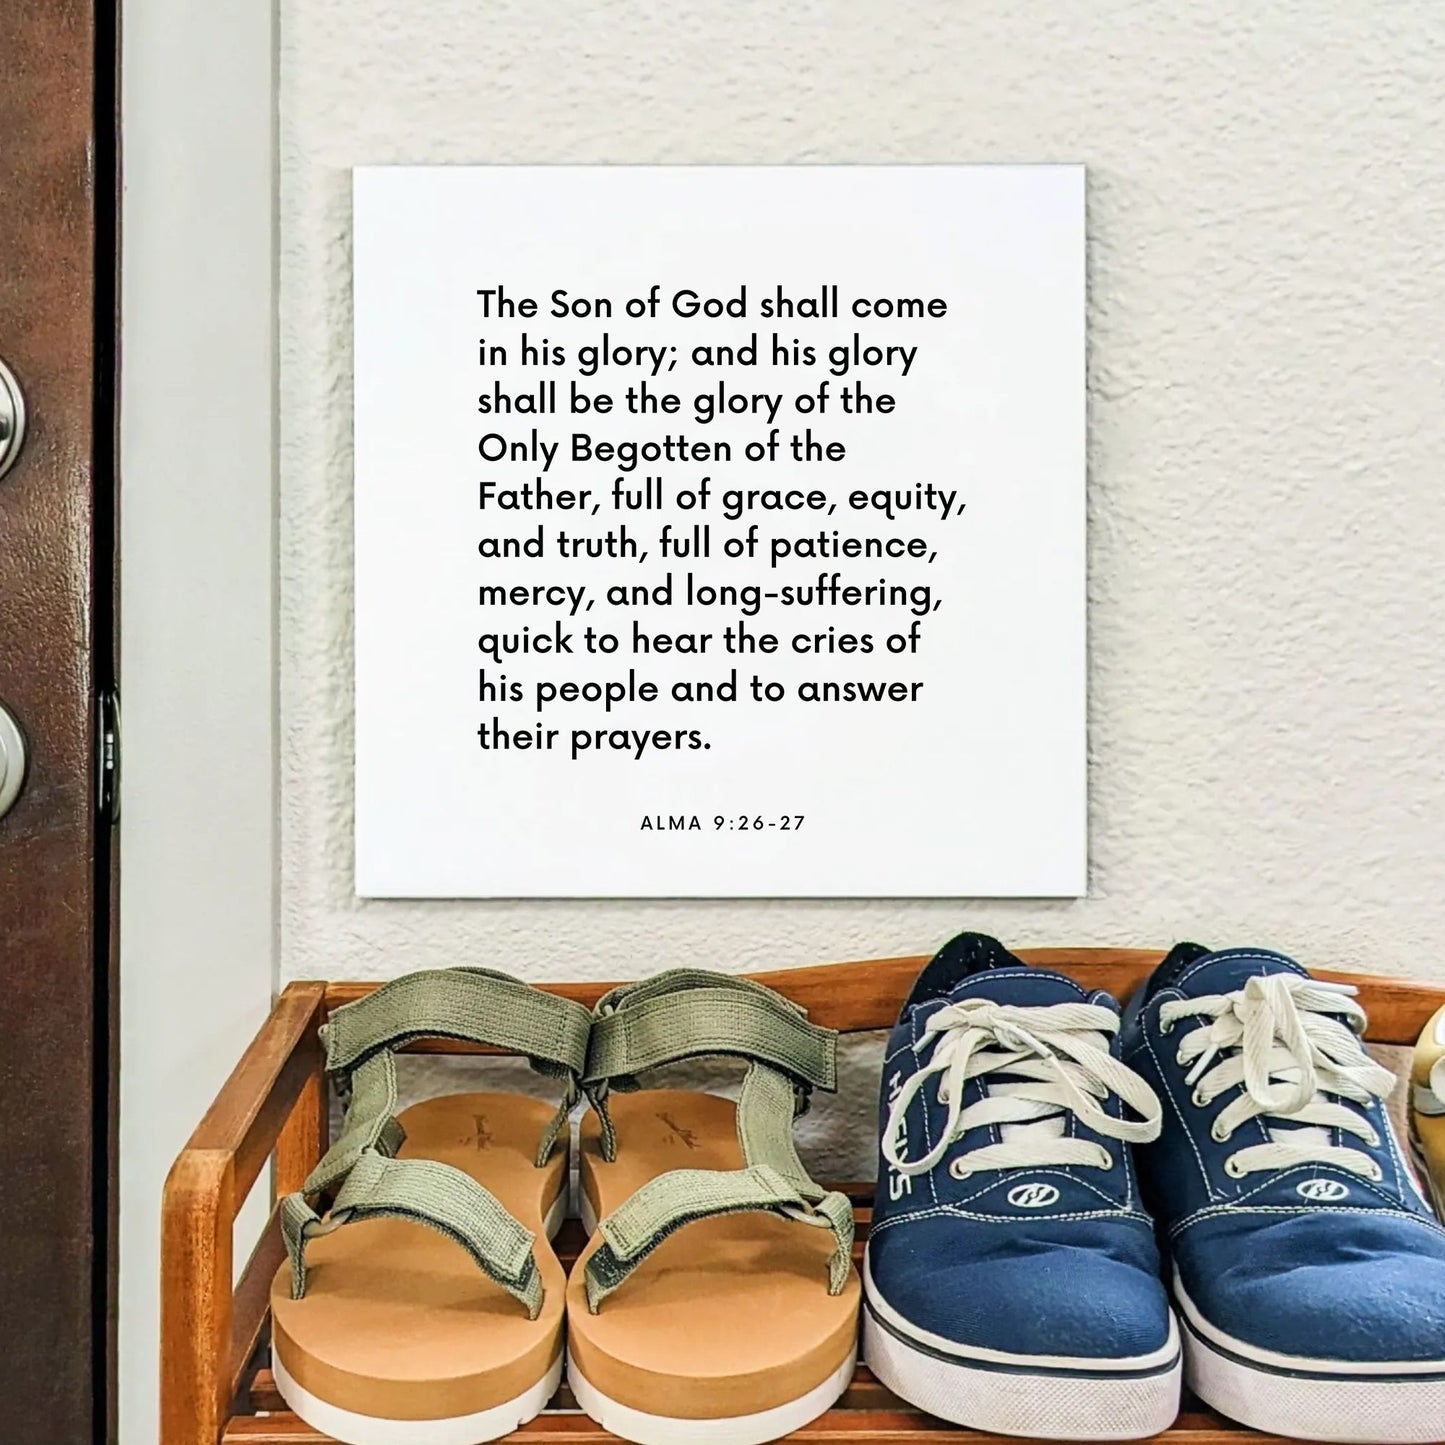 Shoes mouting of the scripture tile for Alma 9:26-27 - "The Son of God shall come in his glory"